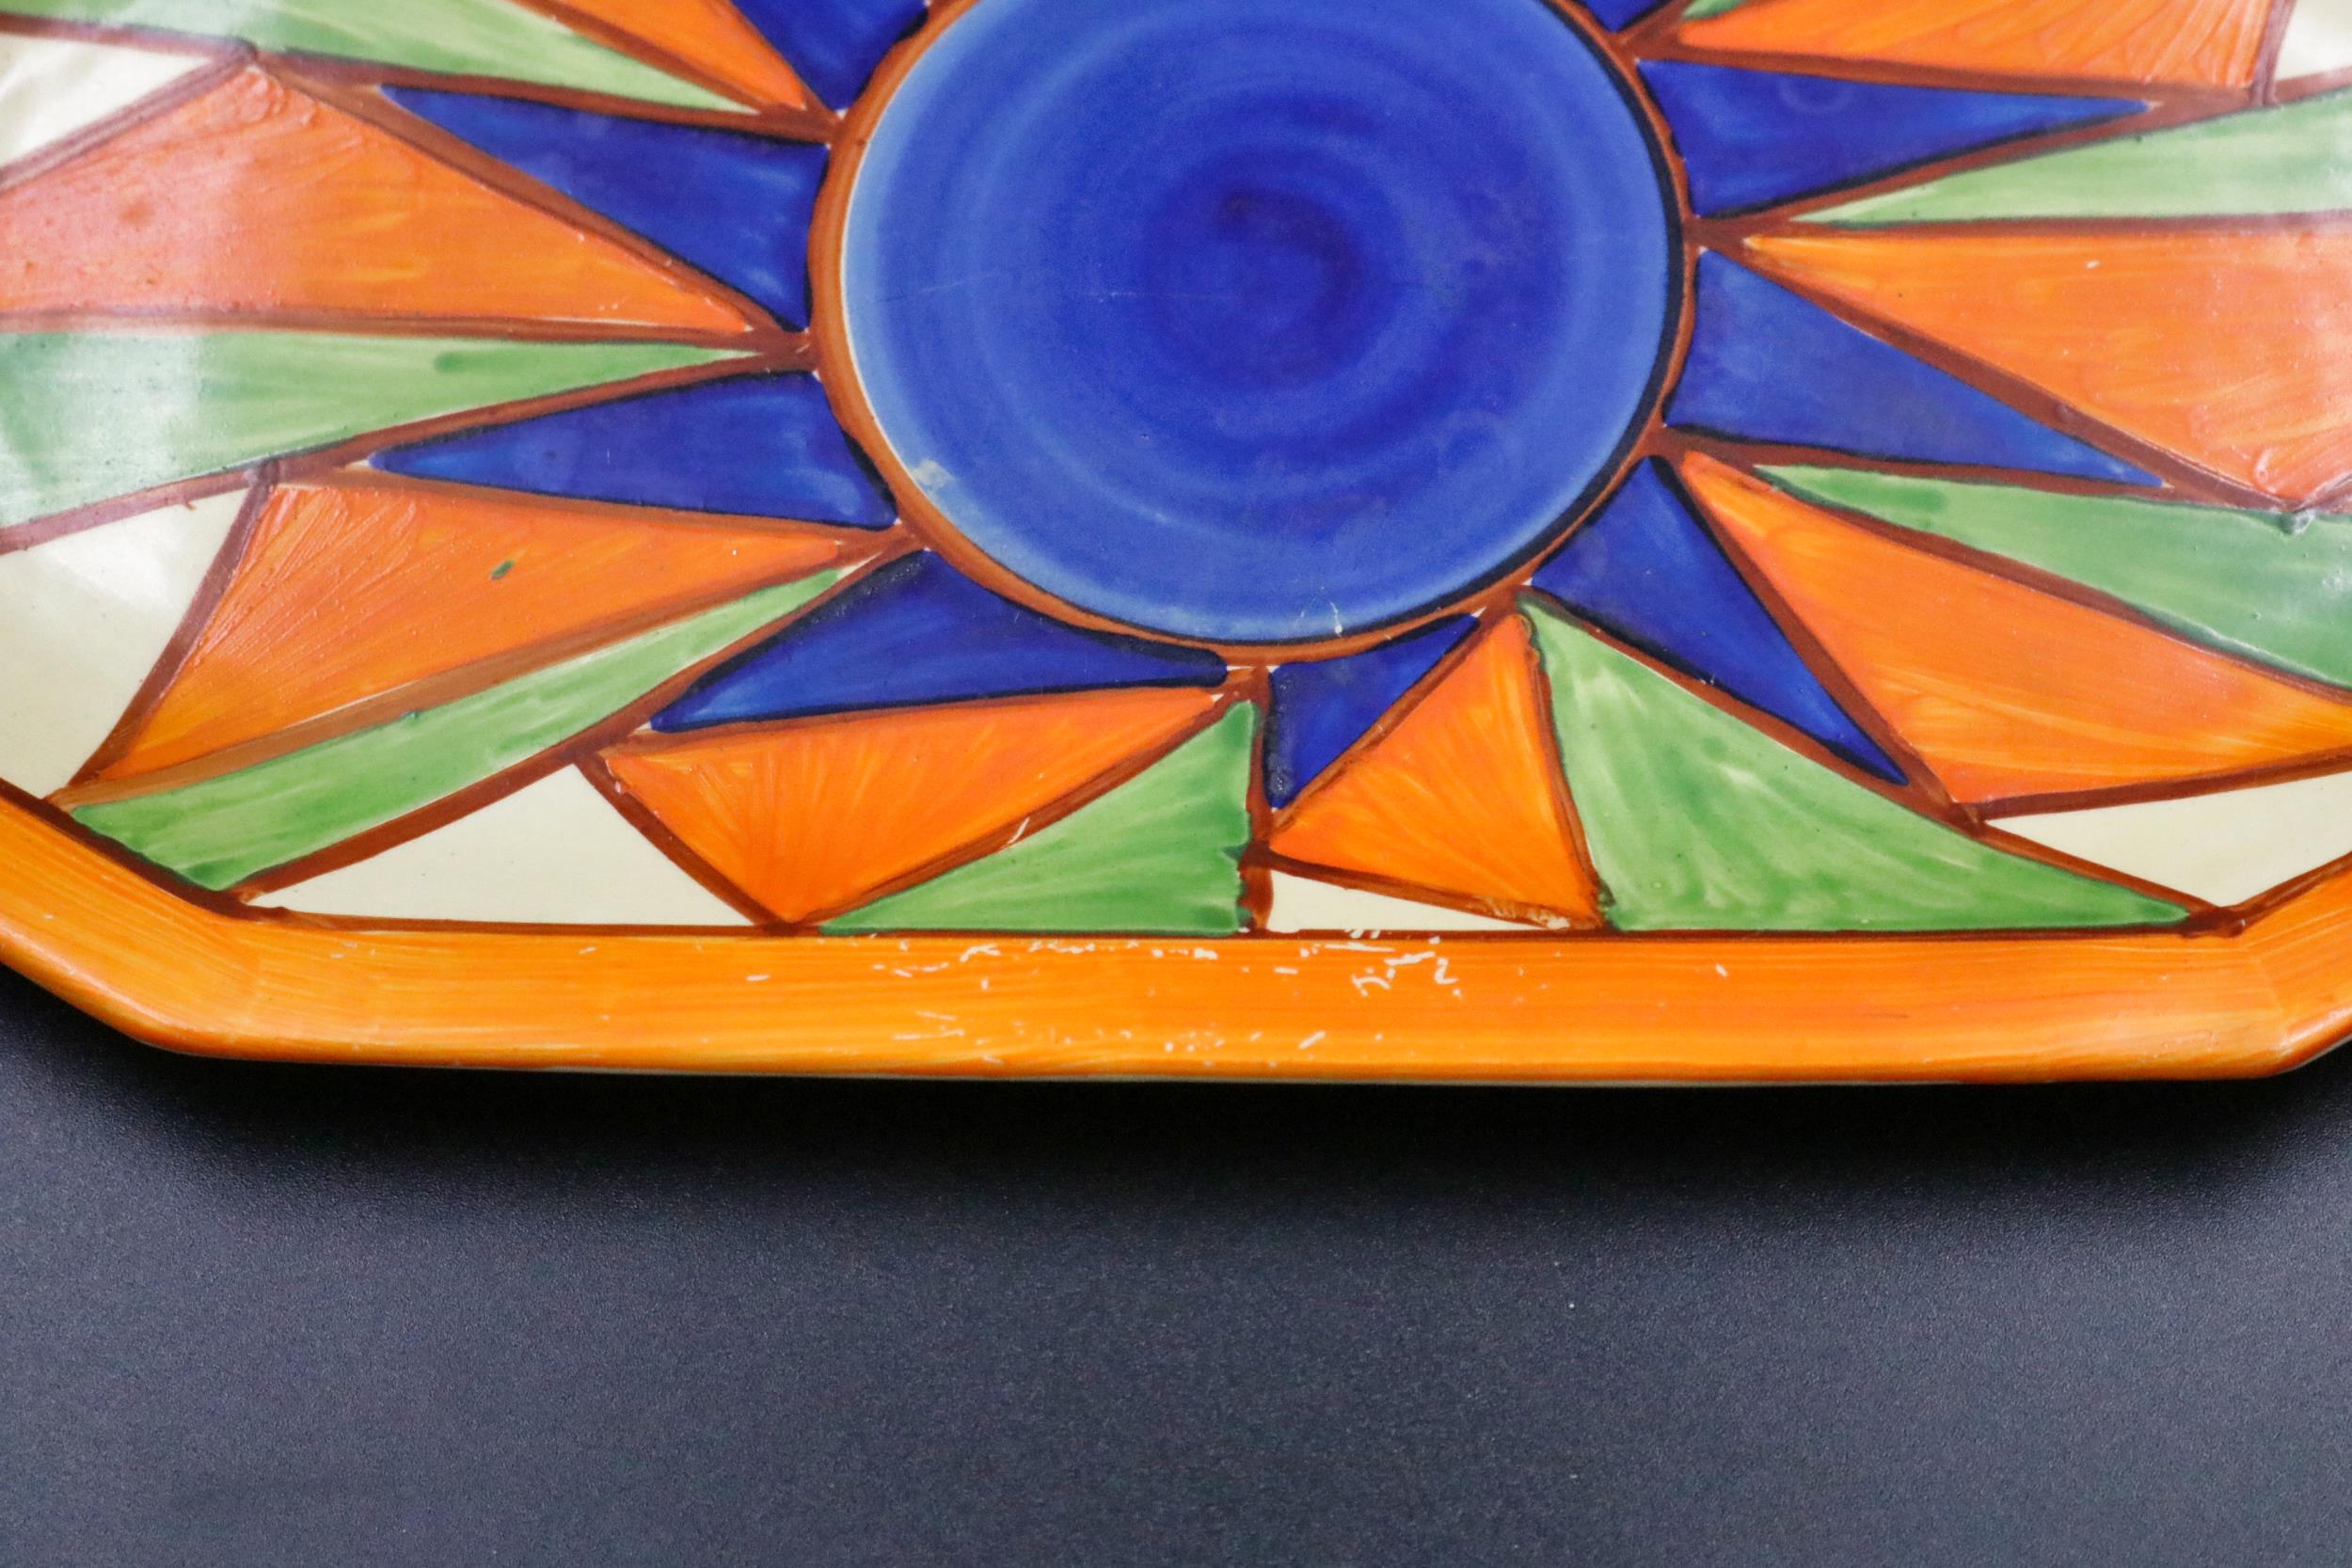 Clarice Cliff, Bizarre pattern sandwich plate - Newport pottery 11.52 x 6" some paint flaking - Image 3 of 8